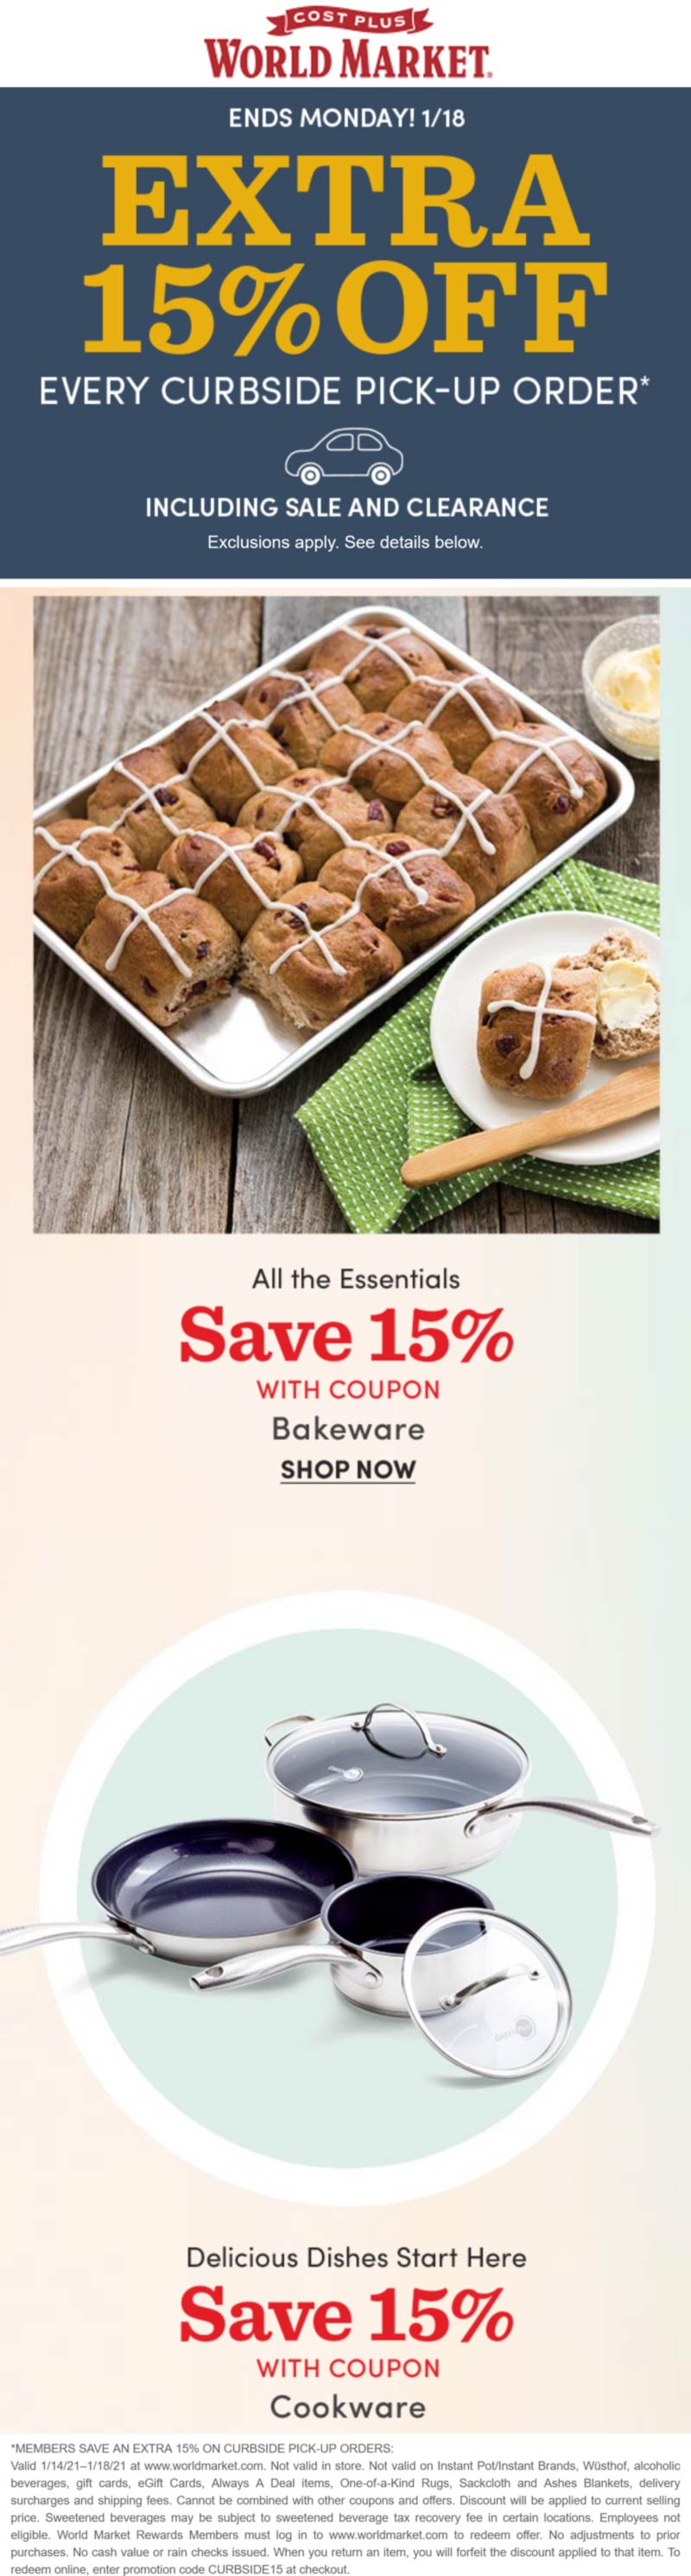 World Market stores Coupon  Extra 15% off curbside pick-up at Cost Plus World Market via promo code CURBSIDE15 #worldmarket 